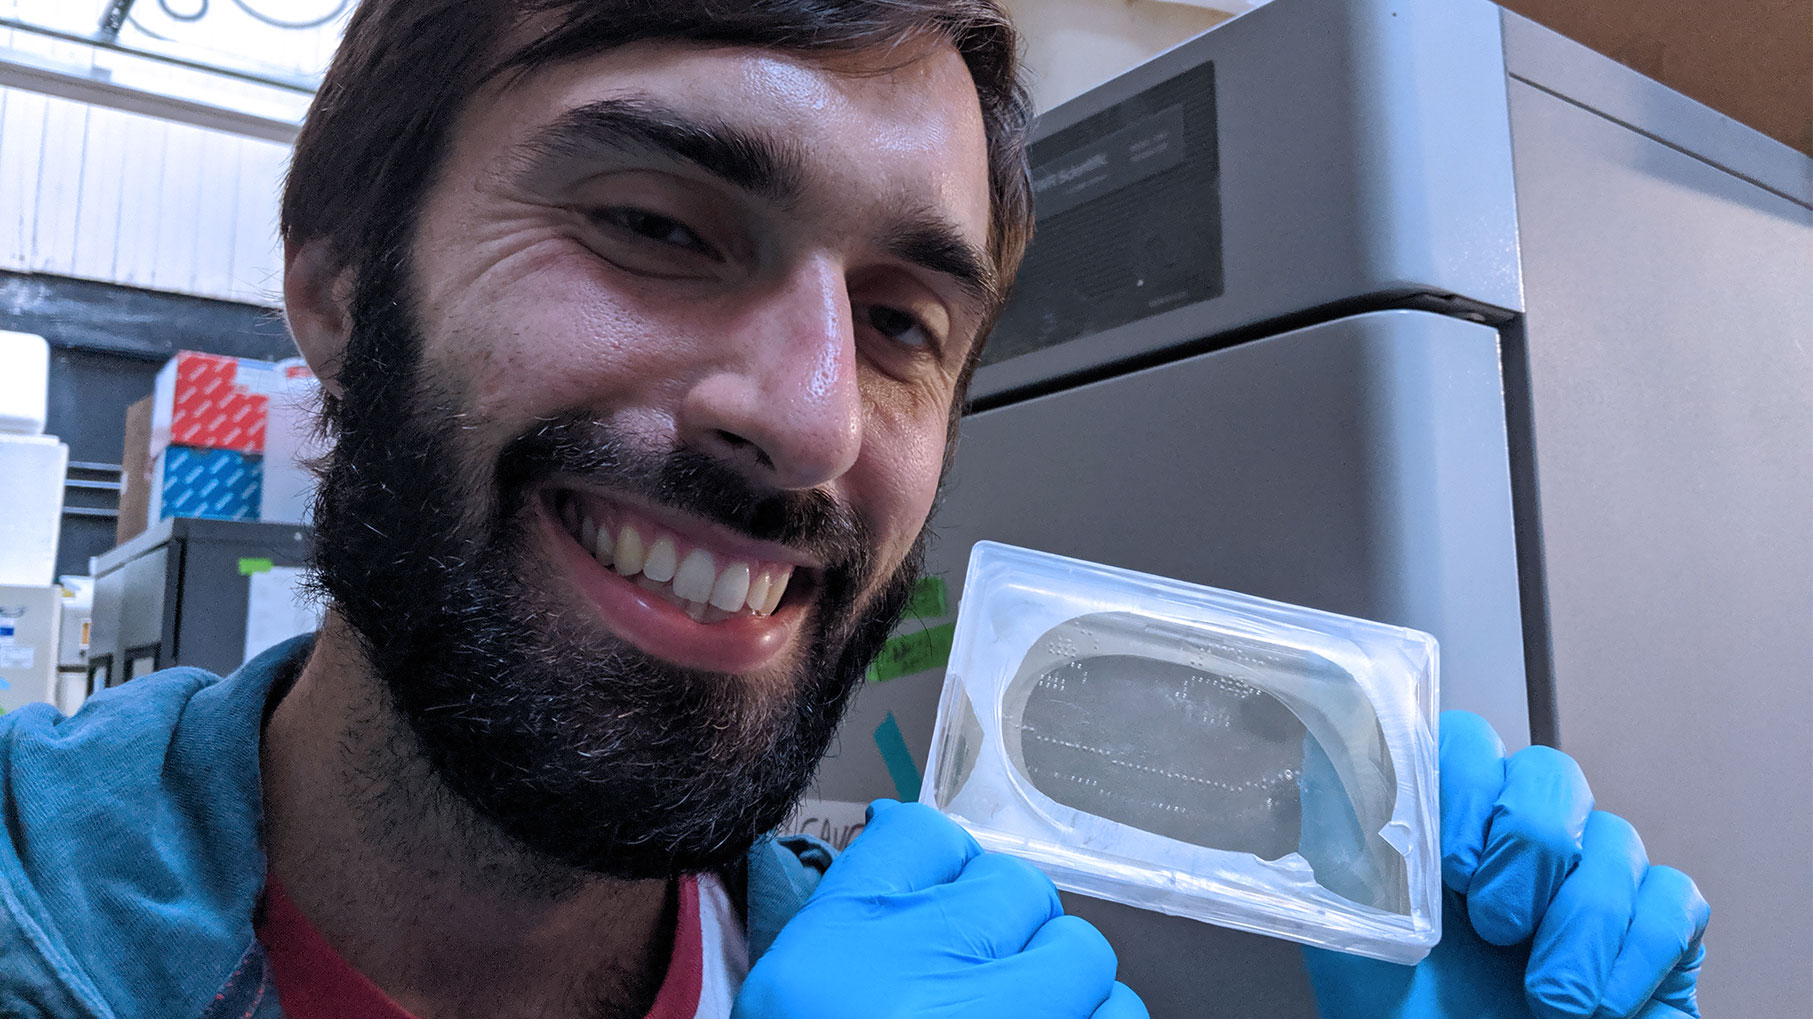 Tim holding one of our first tests, the smiley face agar plate, before putting it into the incubator.